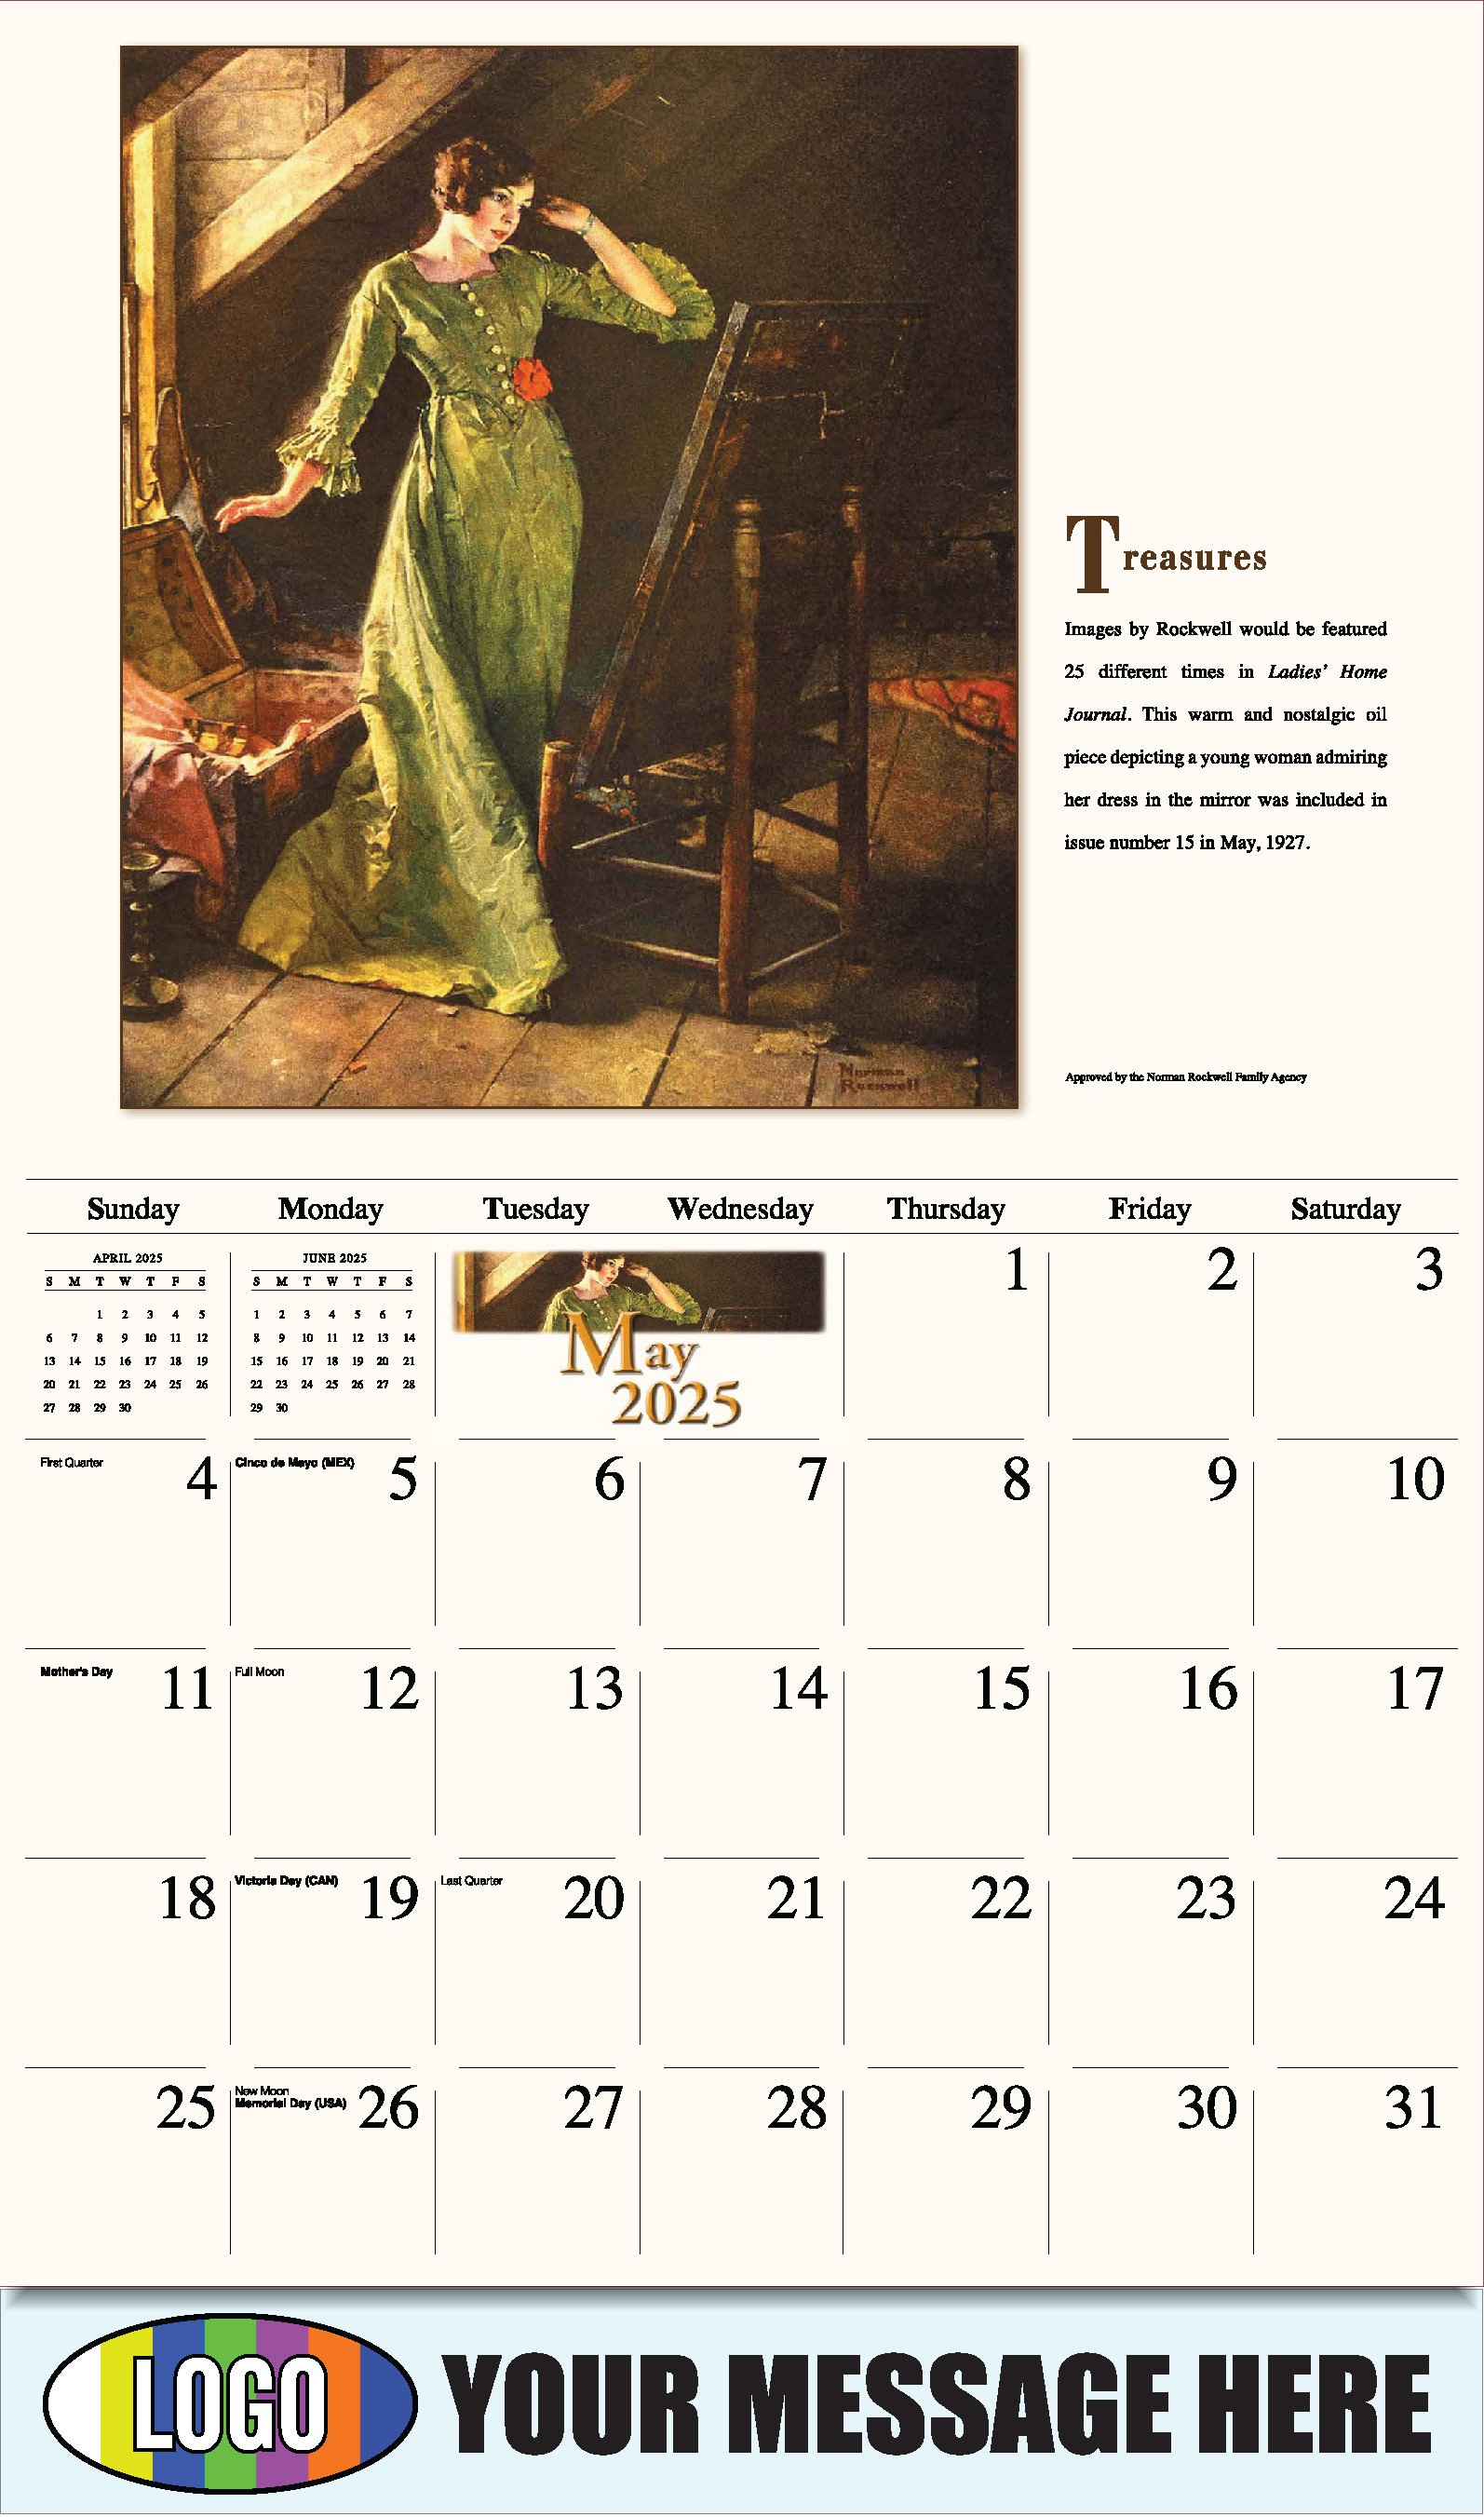 Memorable Images by Norman Rockwell 2025 Business Promotional Wall Calendar - May